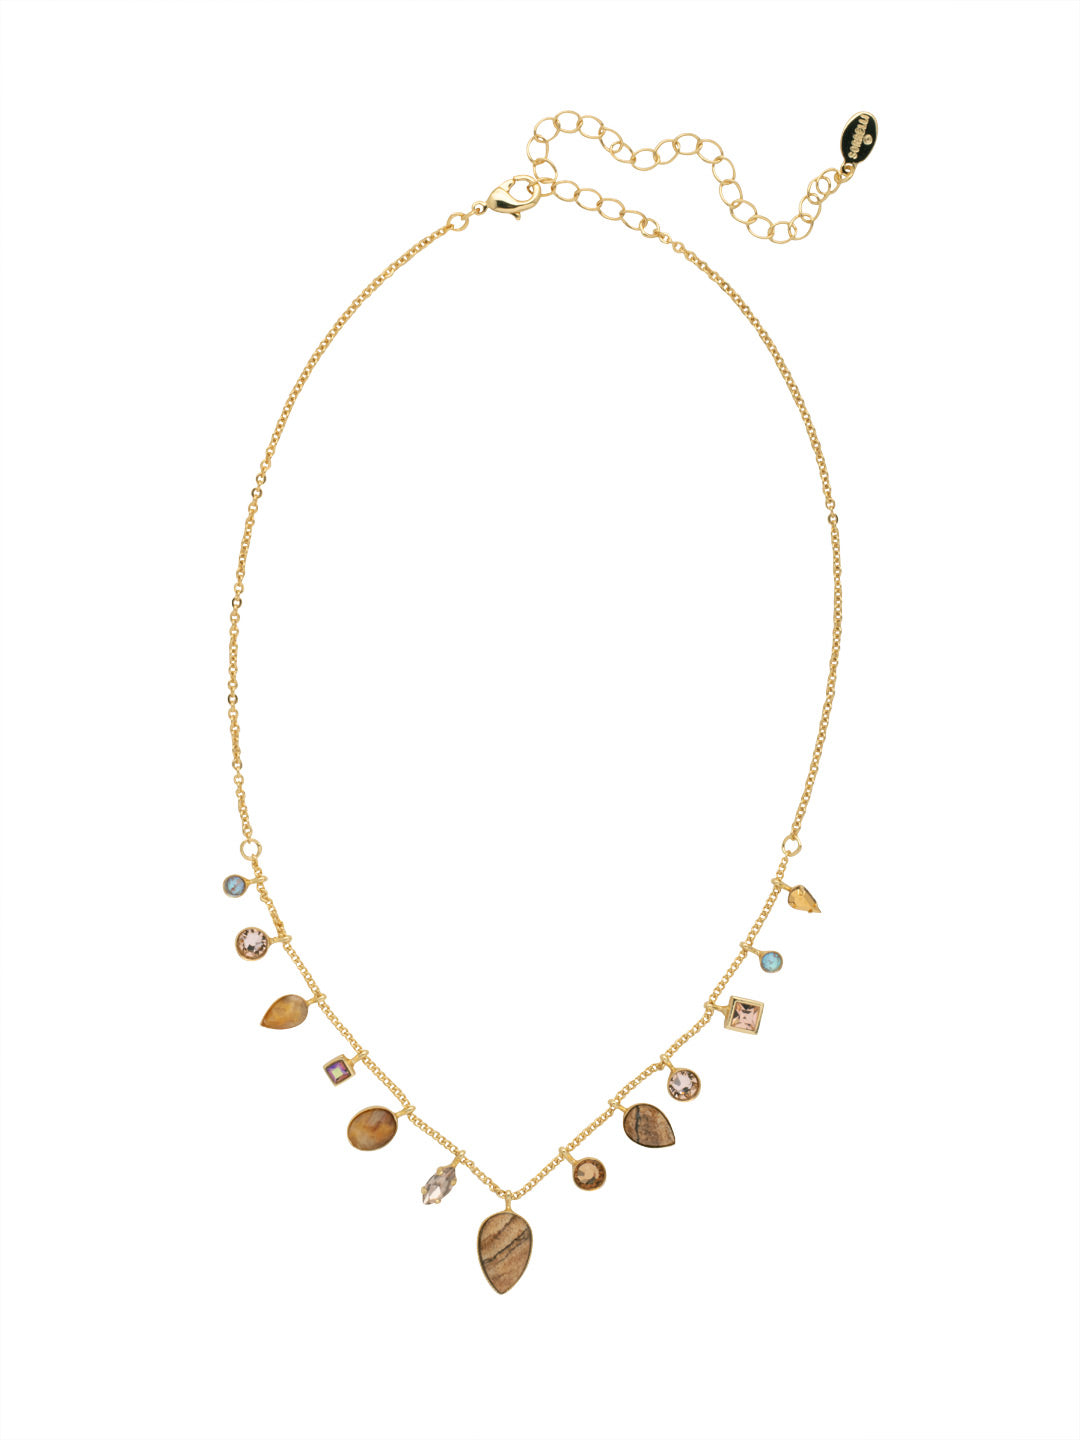 Elaina Tennis Necklace - NFC70BGRSU - <p>The Elaina Tennis Necklace features an assortment of delicate crystal and semi-precious charms on an adjustable lightweight chain, secured with a lobster claw clasp. From Sorrelli's Raw Sugar collection in our Bright Gold-tone finish.</p>